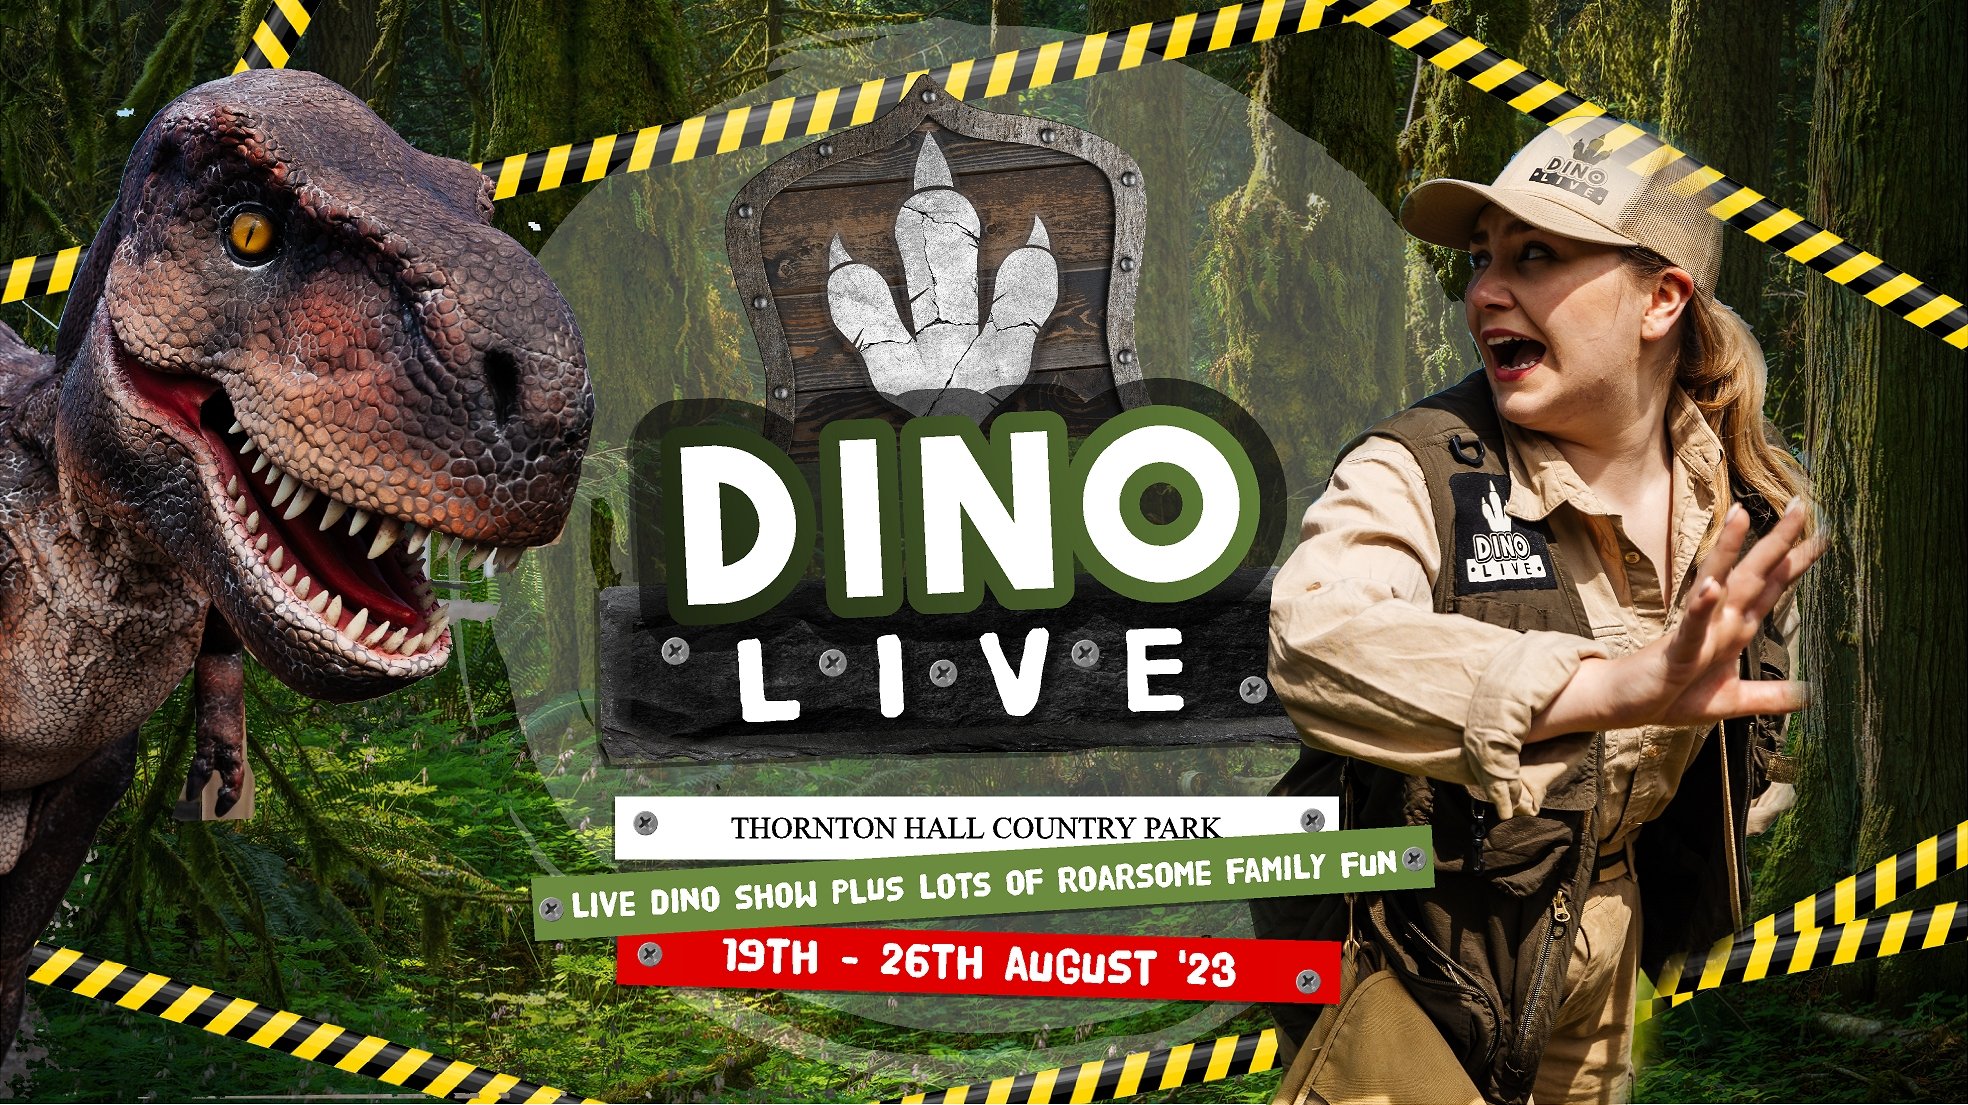 Image name Dino live August the 16 image from the post Dino Live! at Thornton Hall Country Park in Yorkshire.com.